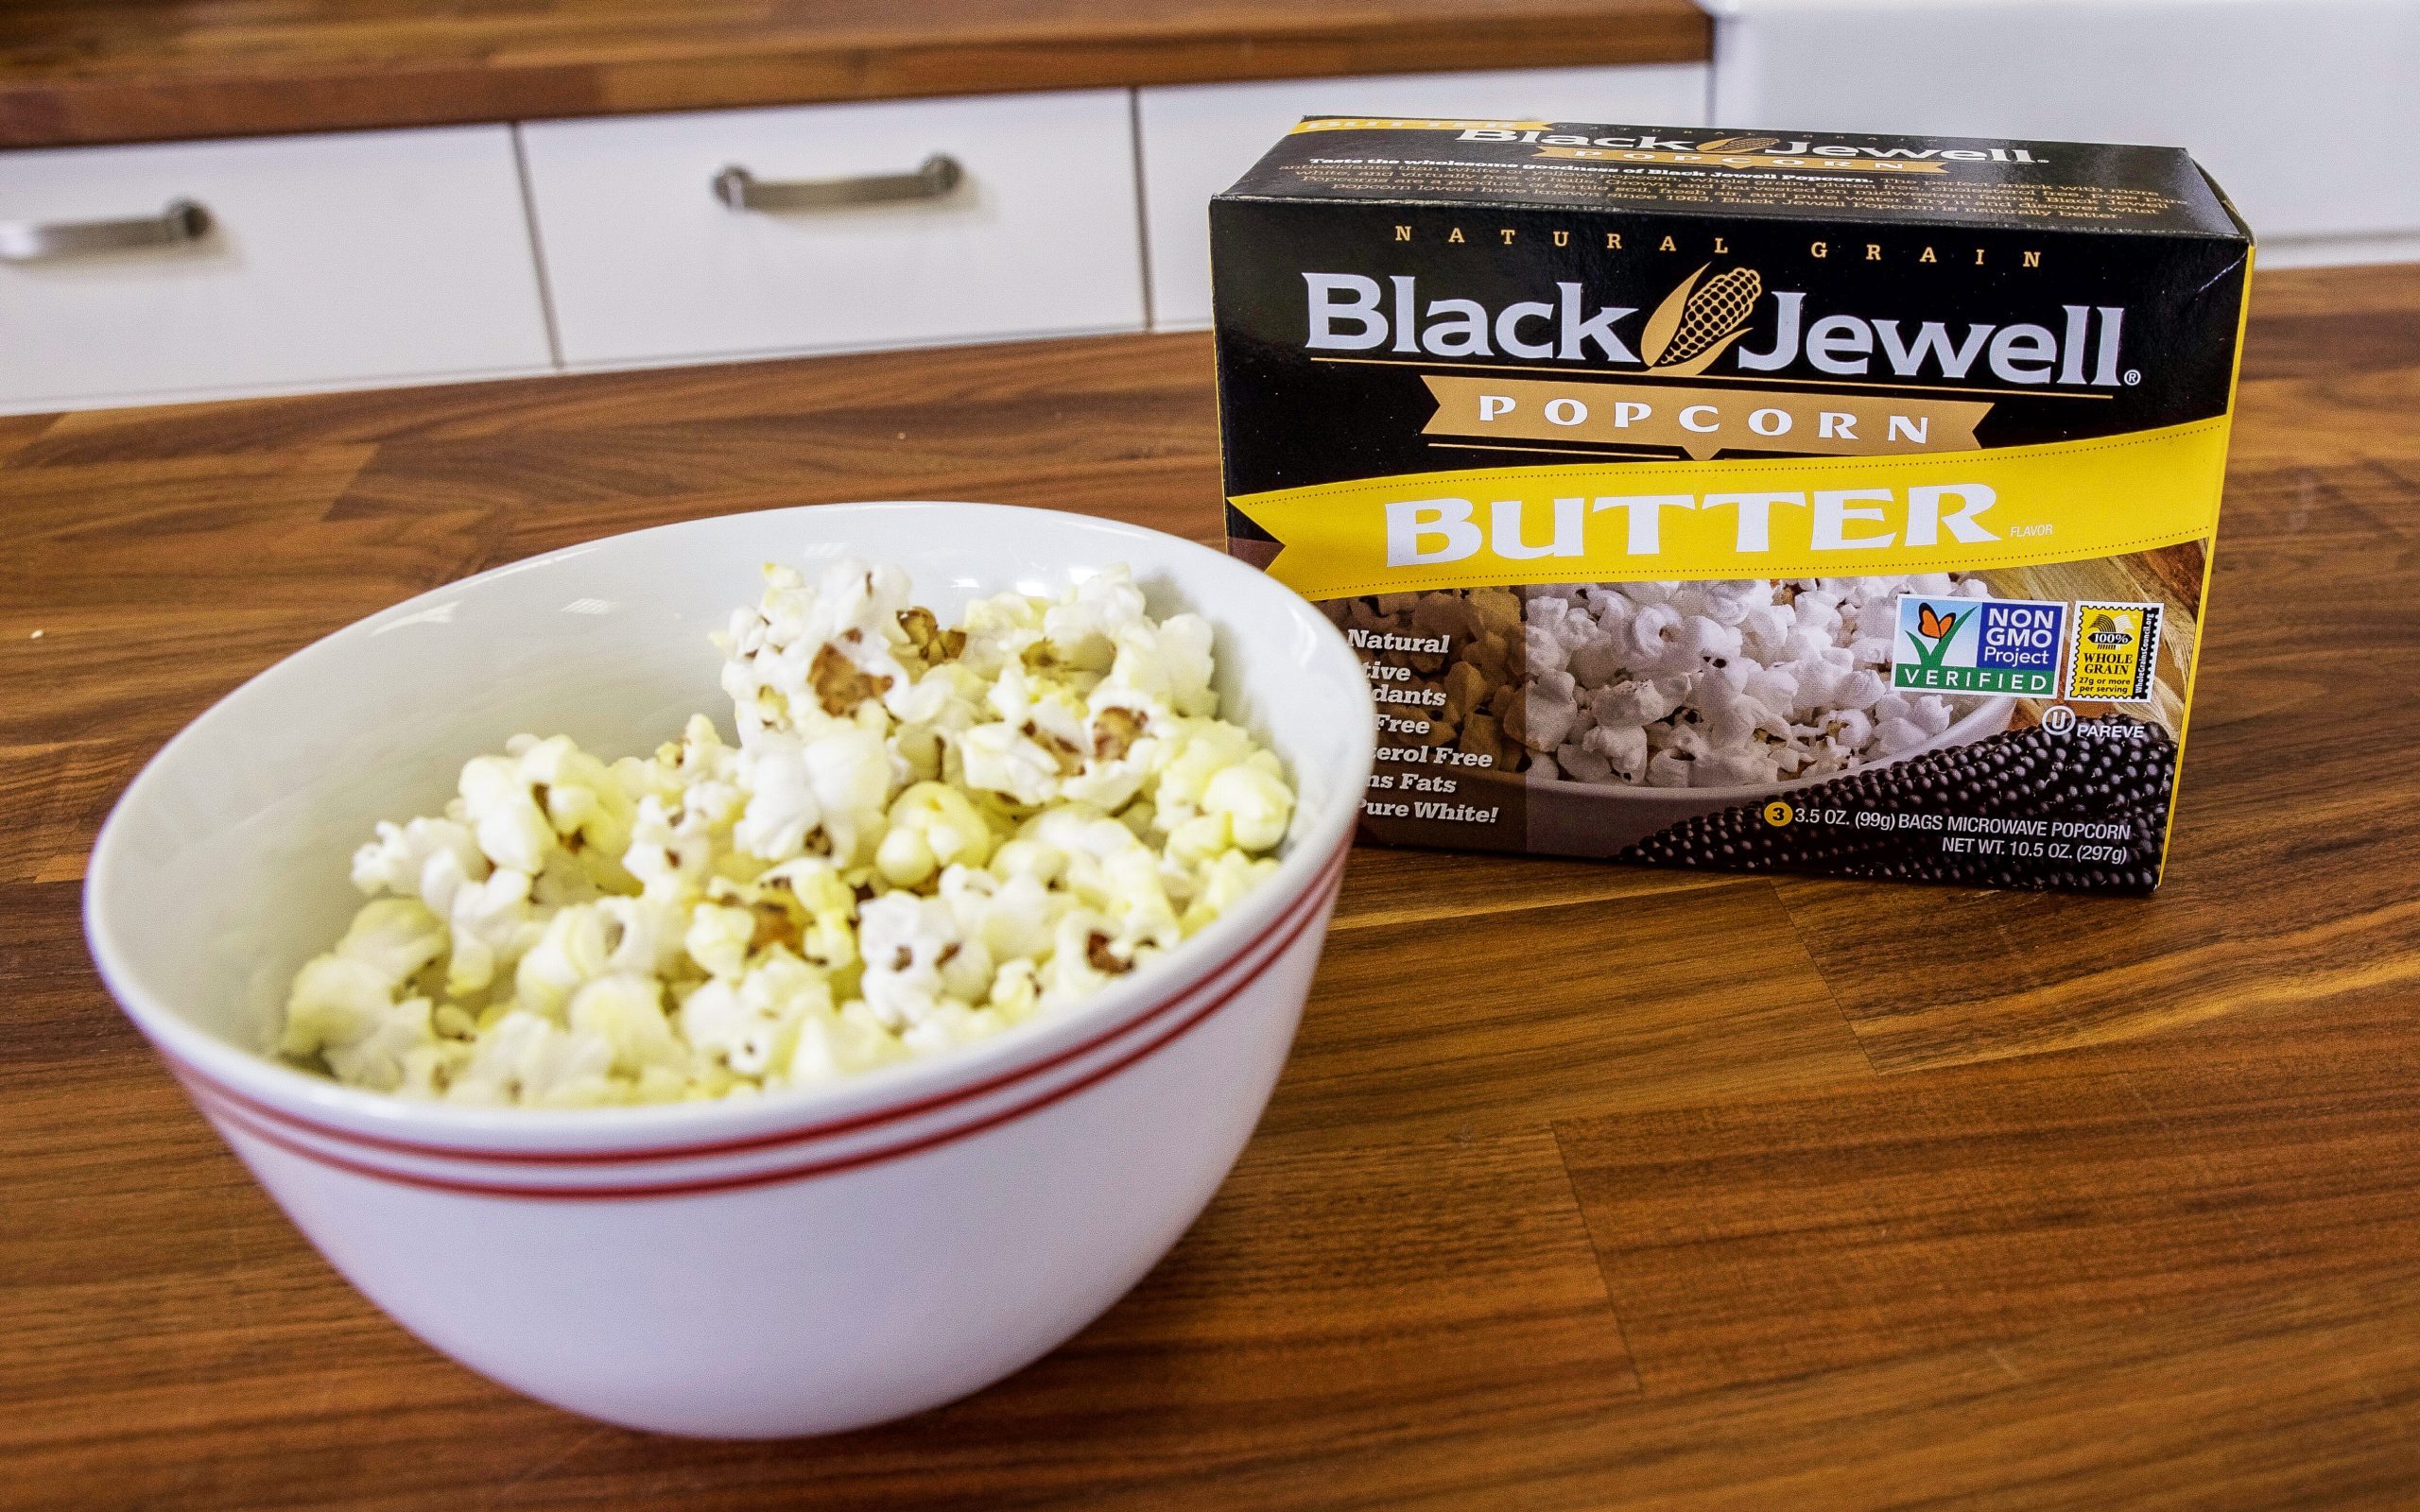 We Tried 10 Brands Of Microwave Popcorn These Are The 4 You Should Buy